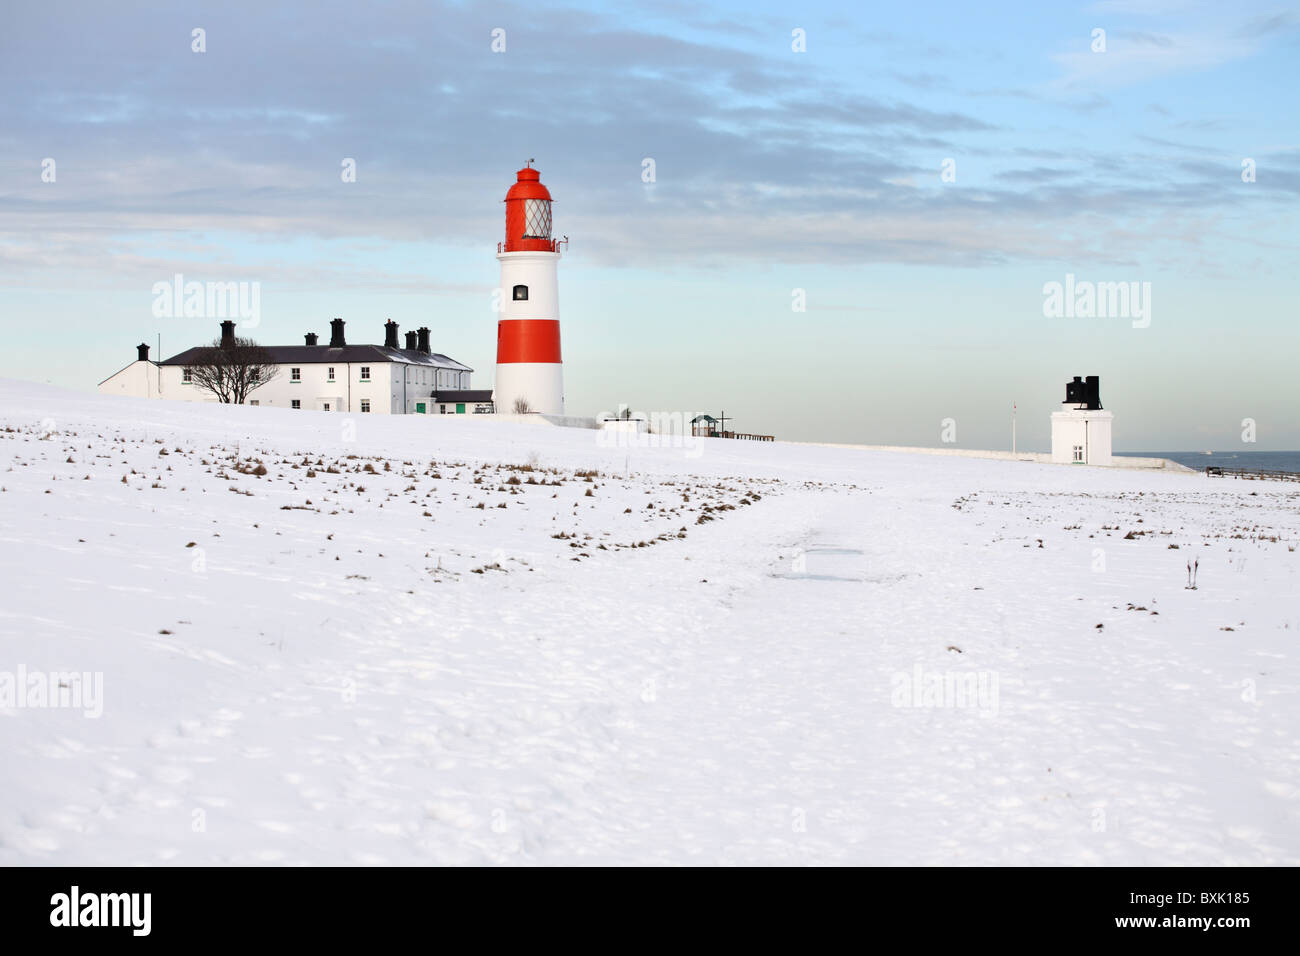 Souter lighthouse and foghorn, Whitburn, with snow on the ground. England, UK. Stock Photo